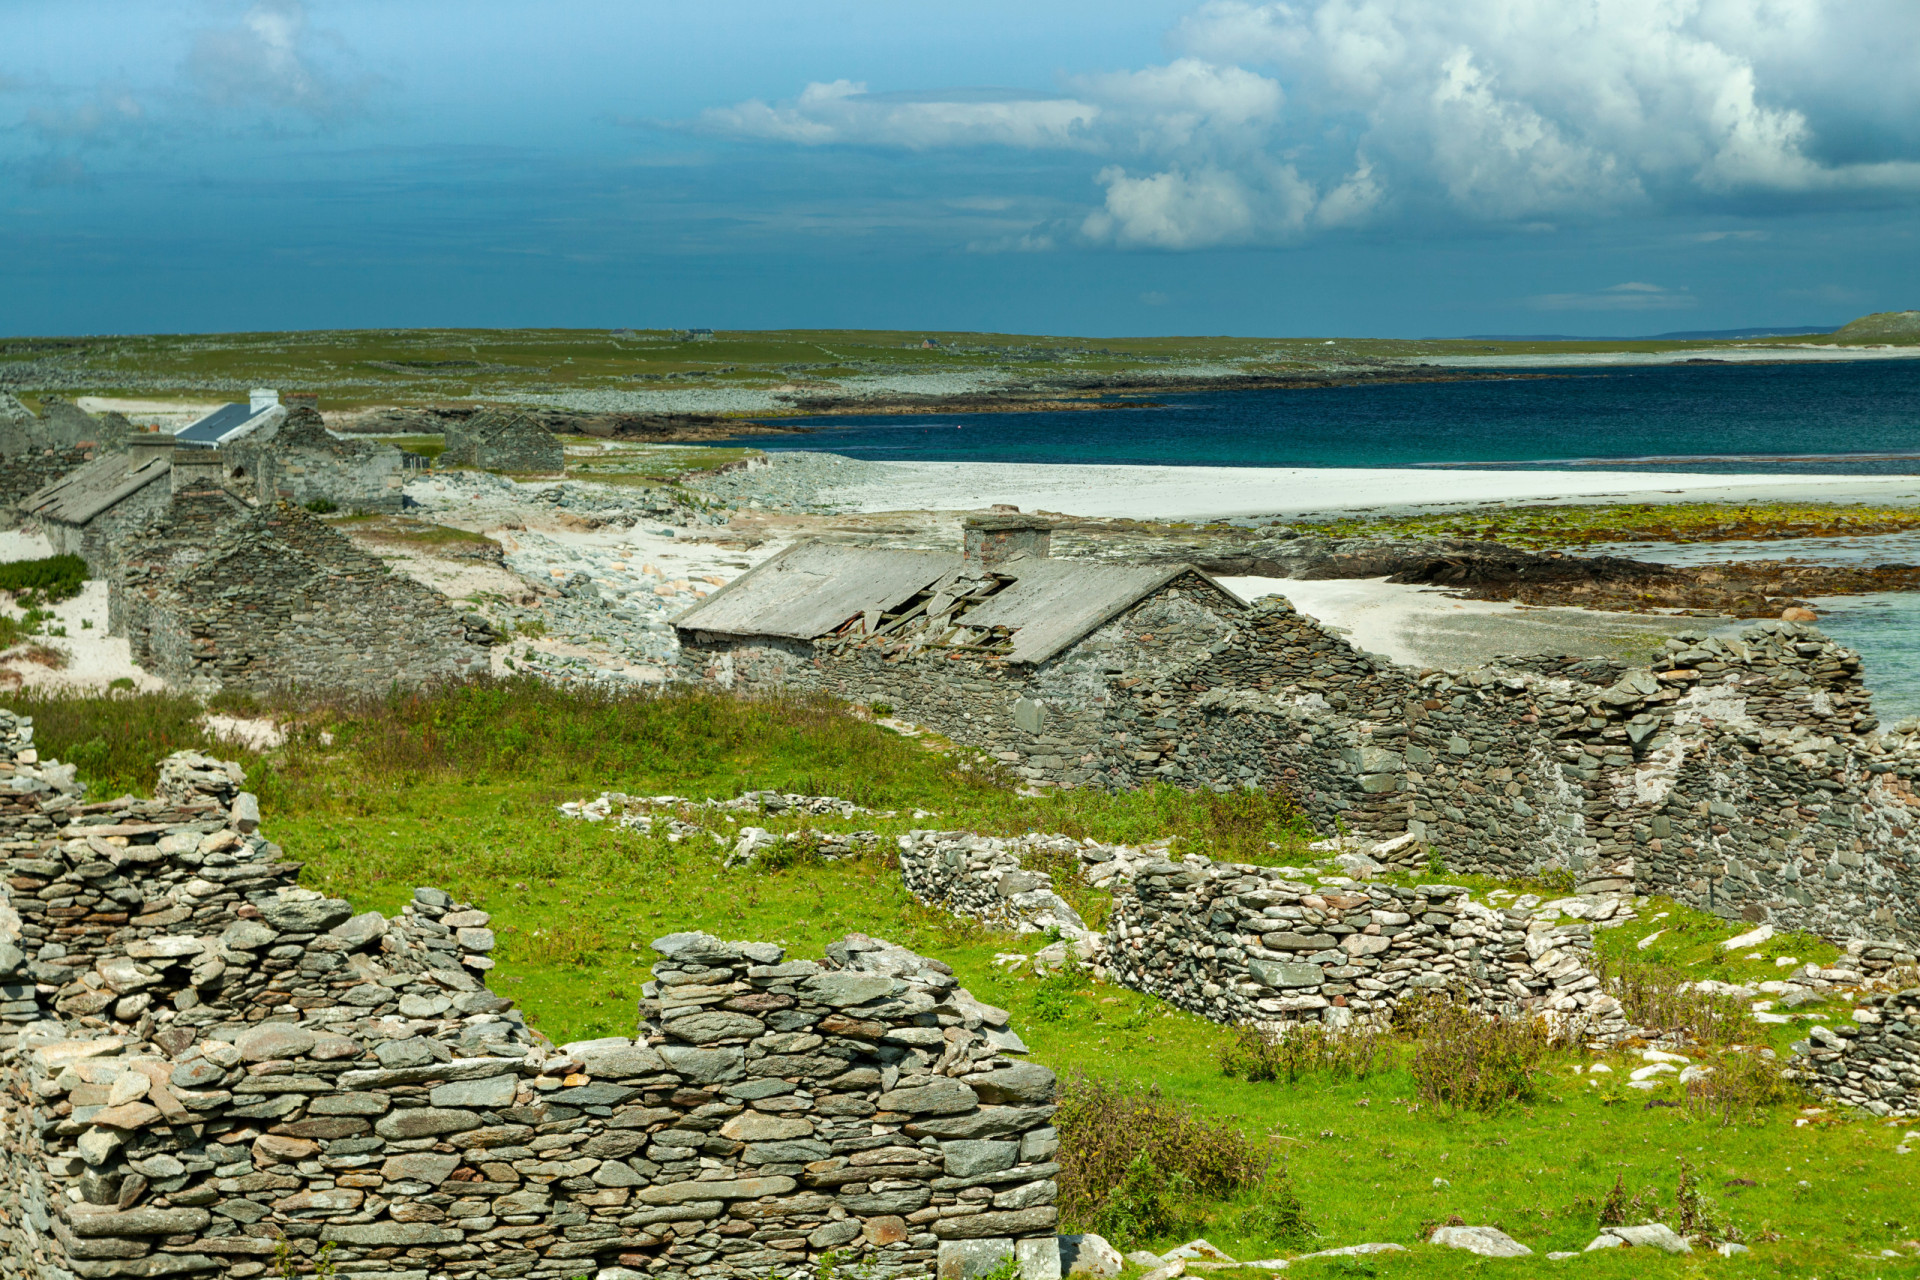 <p>The remains of stone cottages from the 1800s still stand on the islands, a relic of the past and the <a href="https://www.starsinsider.com/lifestyle/502545/the-worst-famines-in-history" rel="noopener">Famine</a>'s legacy. Visitors can explore the unspoiled islands on foot.</p>